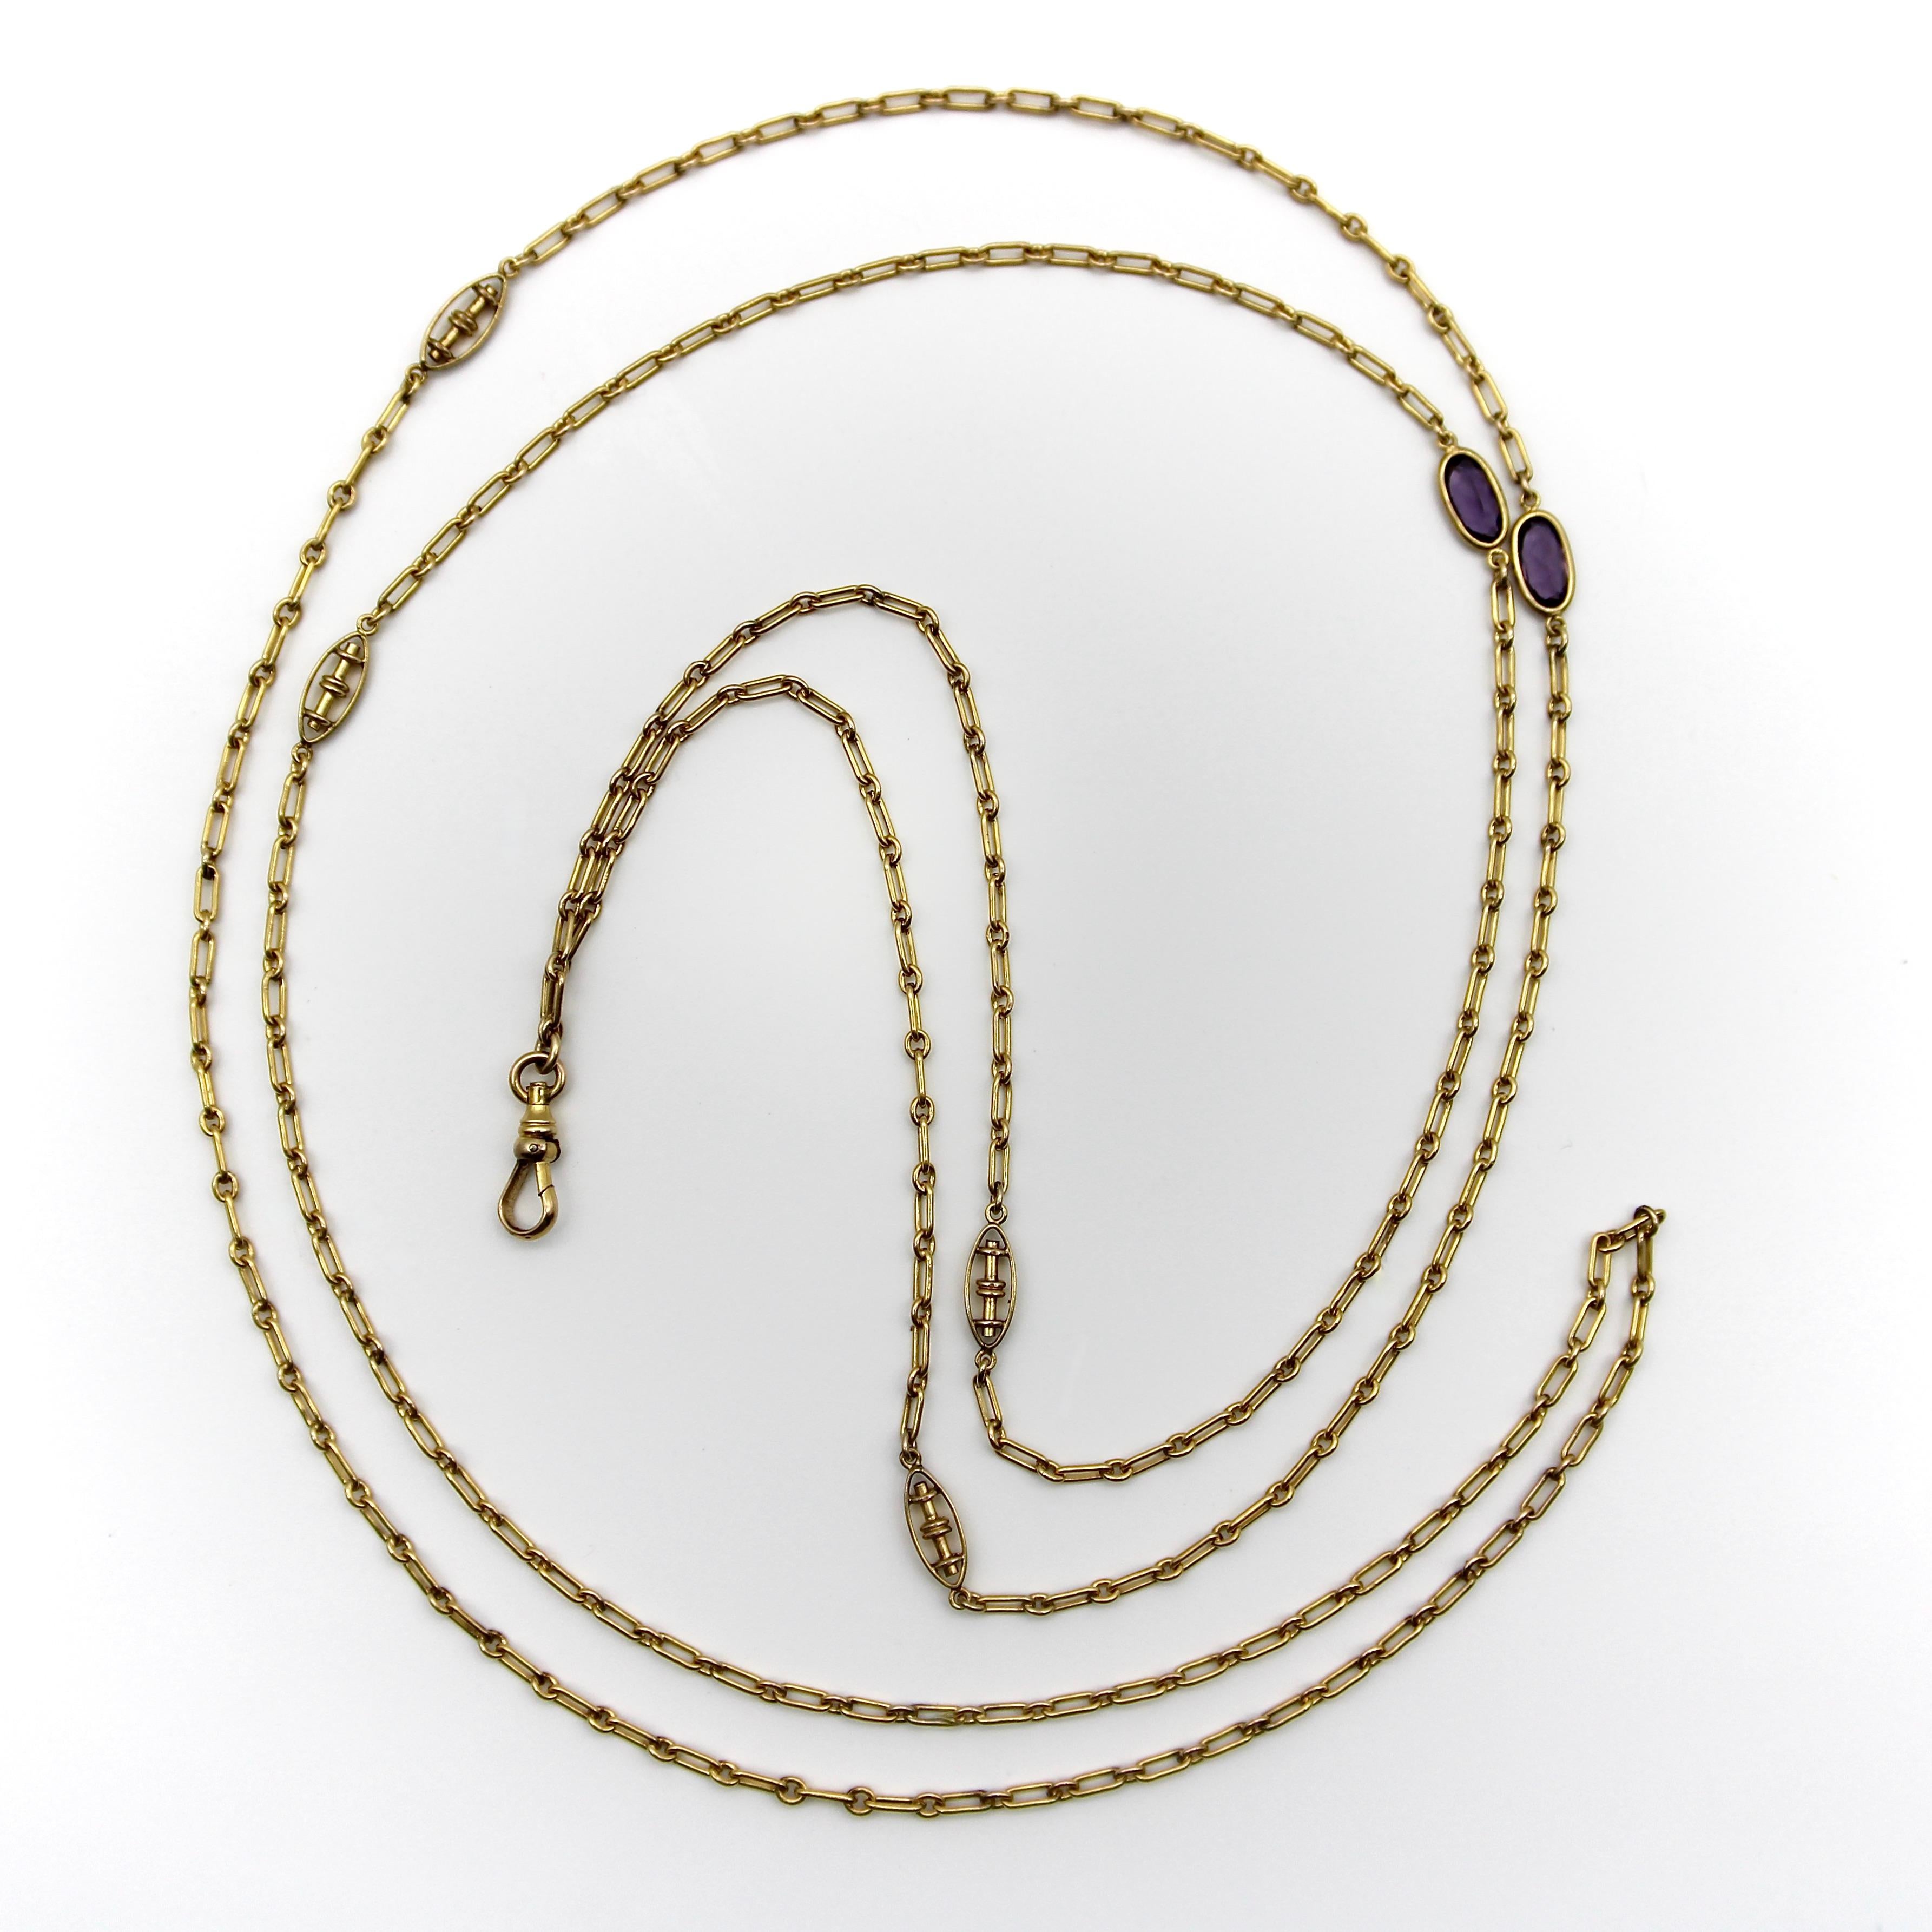 It’s always good to have an extra long chain in your collection, and this 10k gold 52” long Edwardian chain is the perfect piece to wear multiple ways. The chain consists of a tiny long trombone-shaped link alternating with a circular link. There